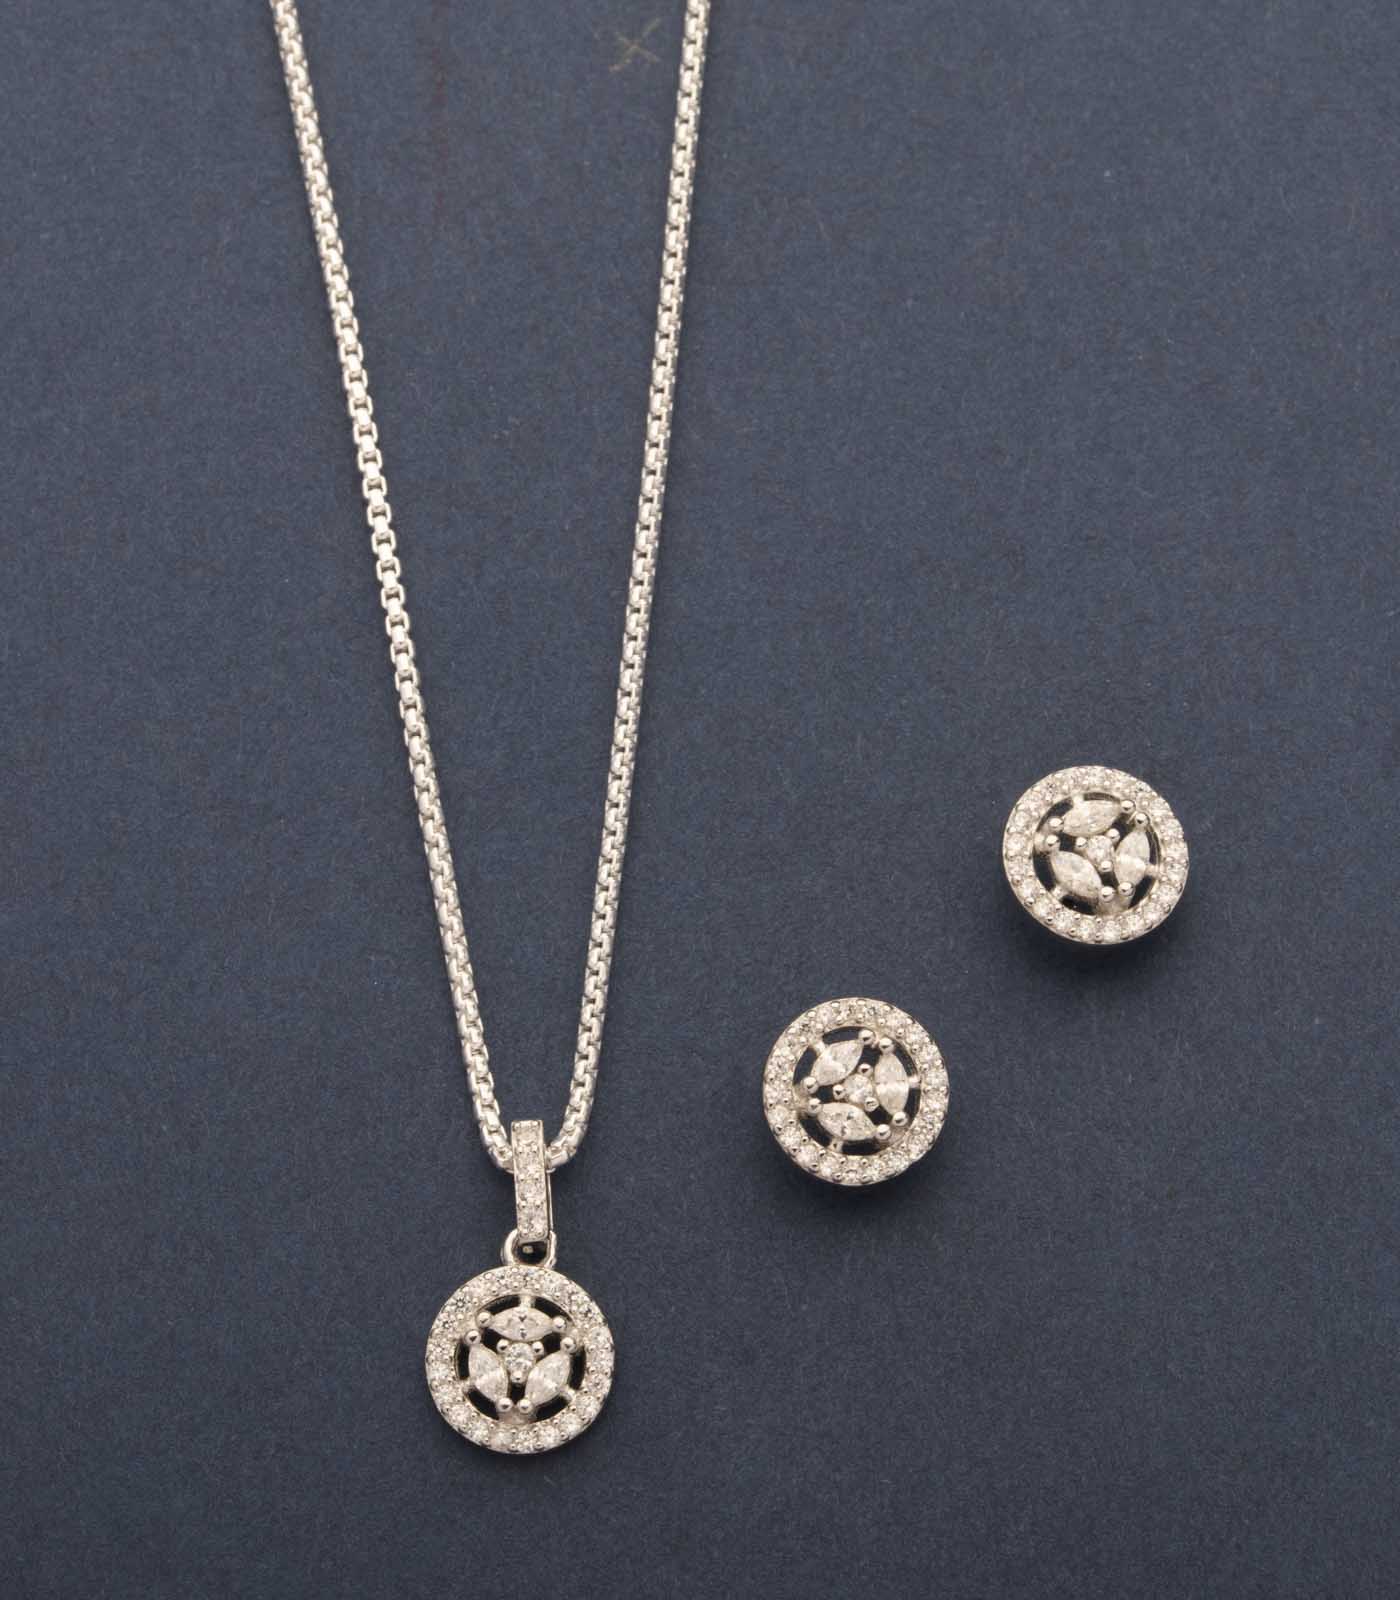 Adoring Maze Of Silver And Gems Pendant Set (Silver)